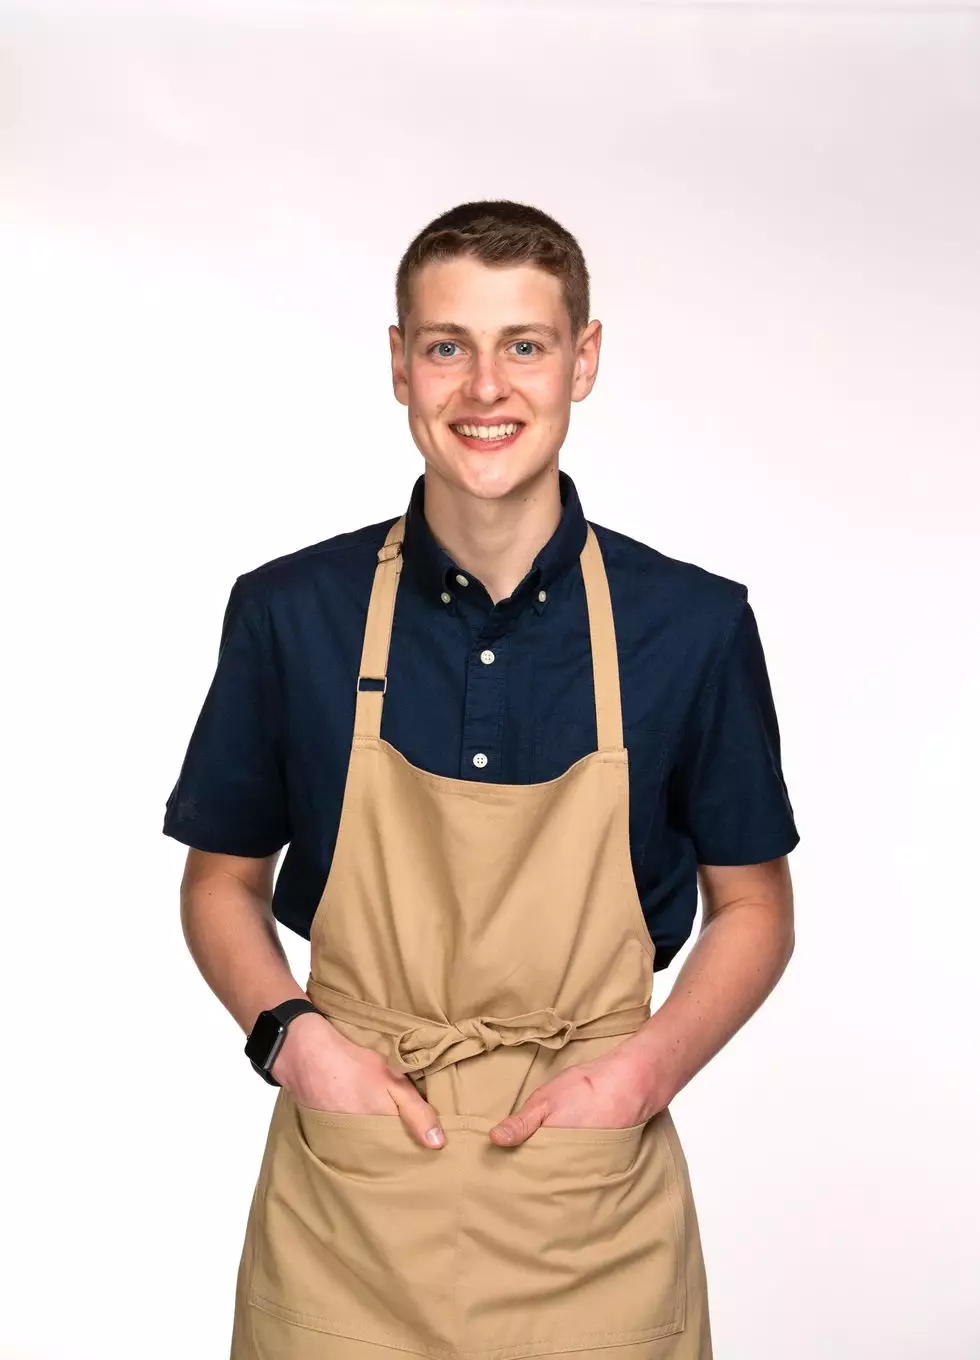 20-year-old Peter is an accounting and finance student and this year's youngest contestant (